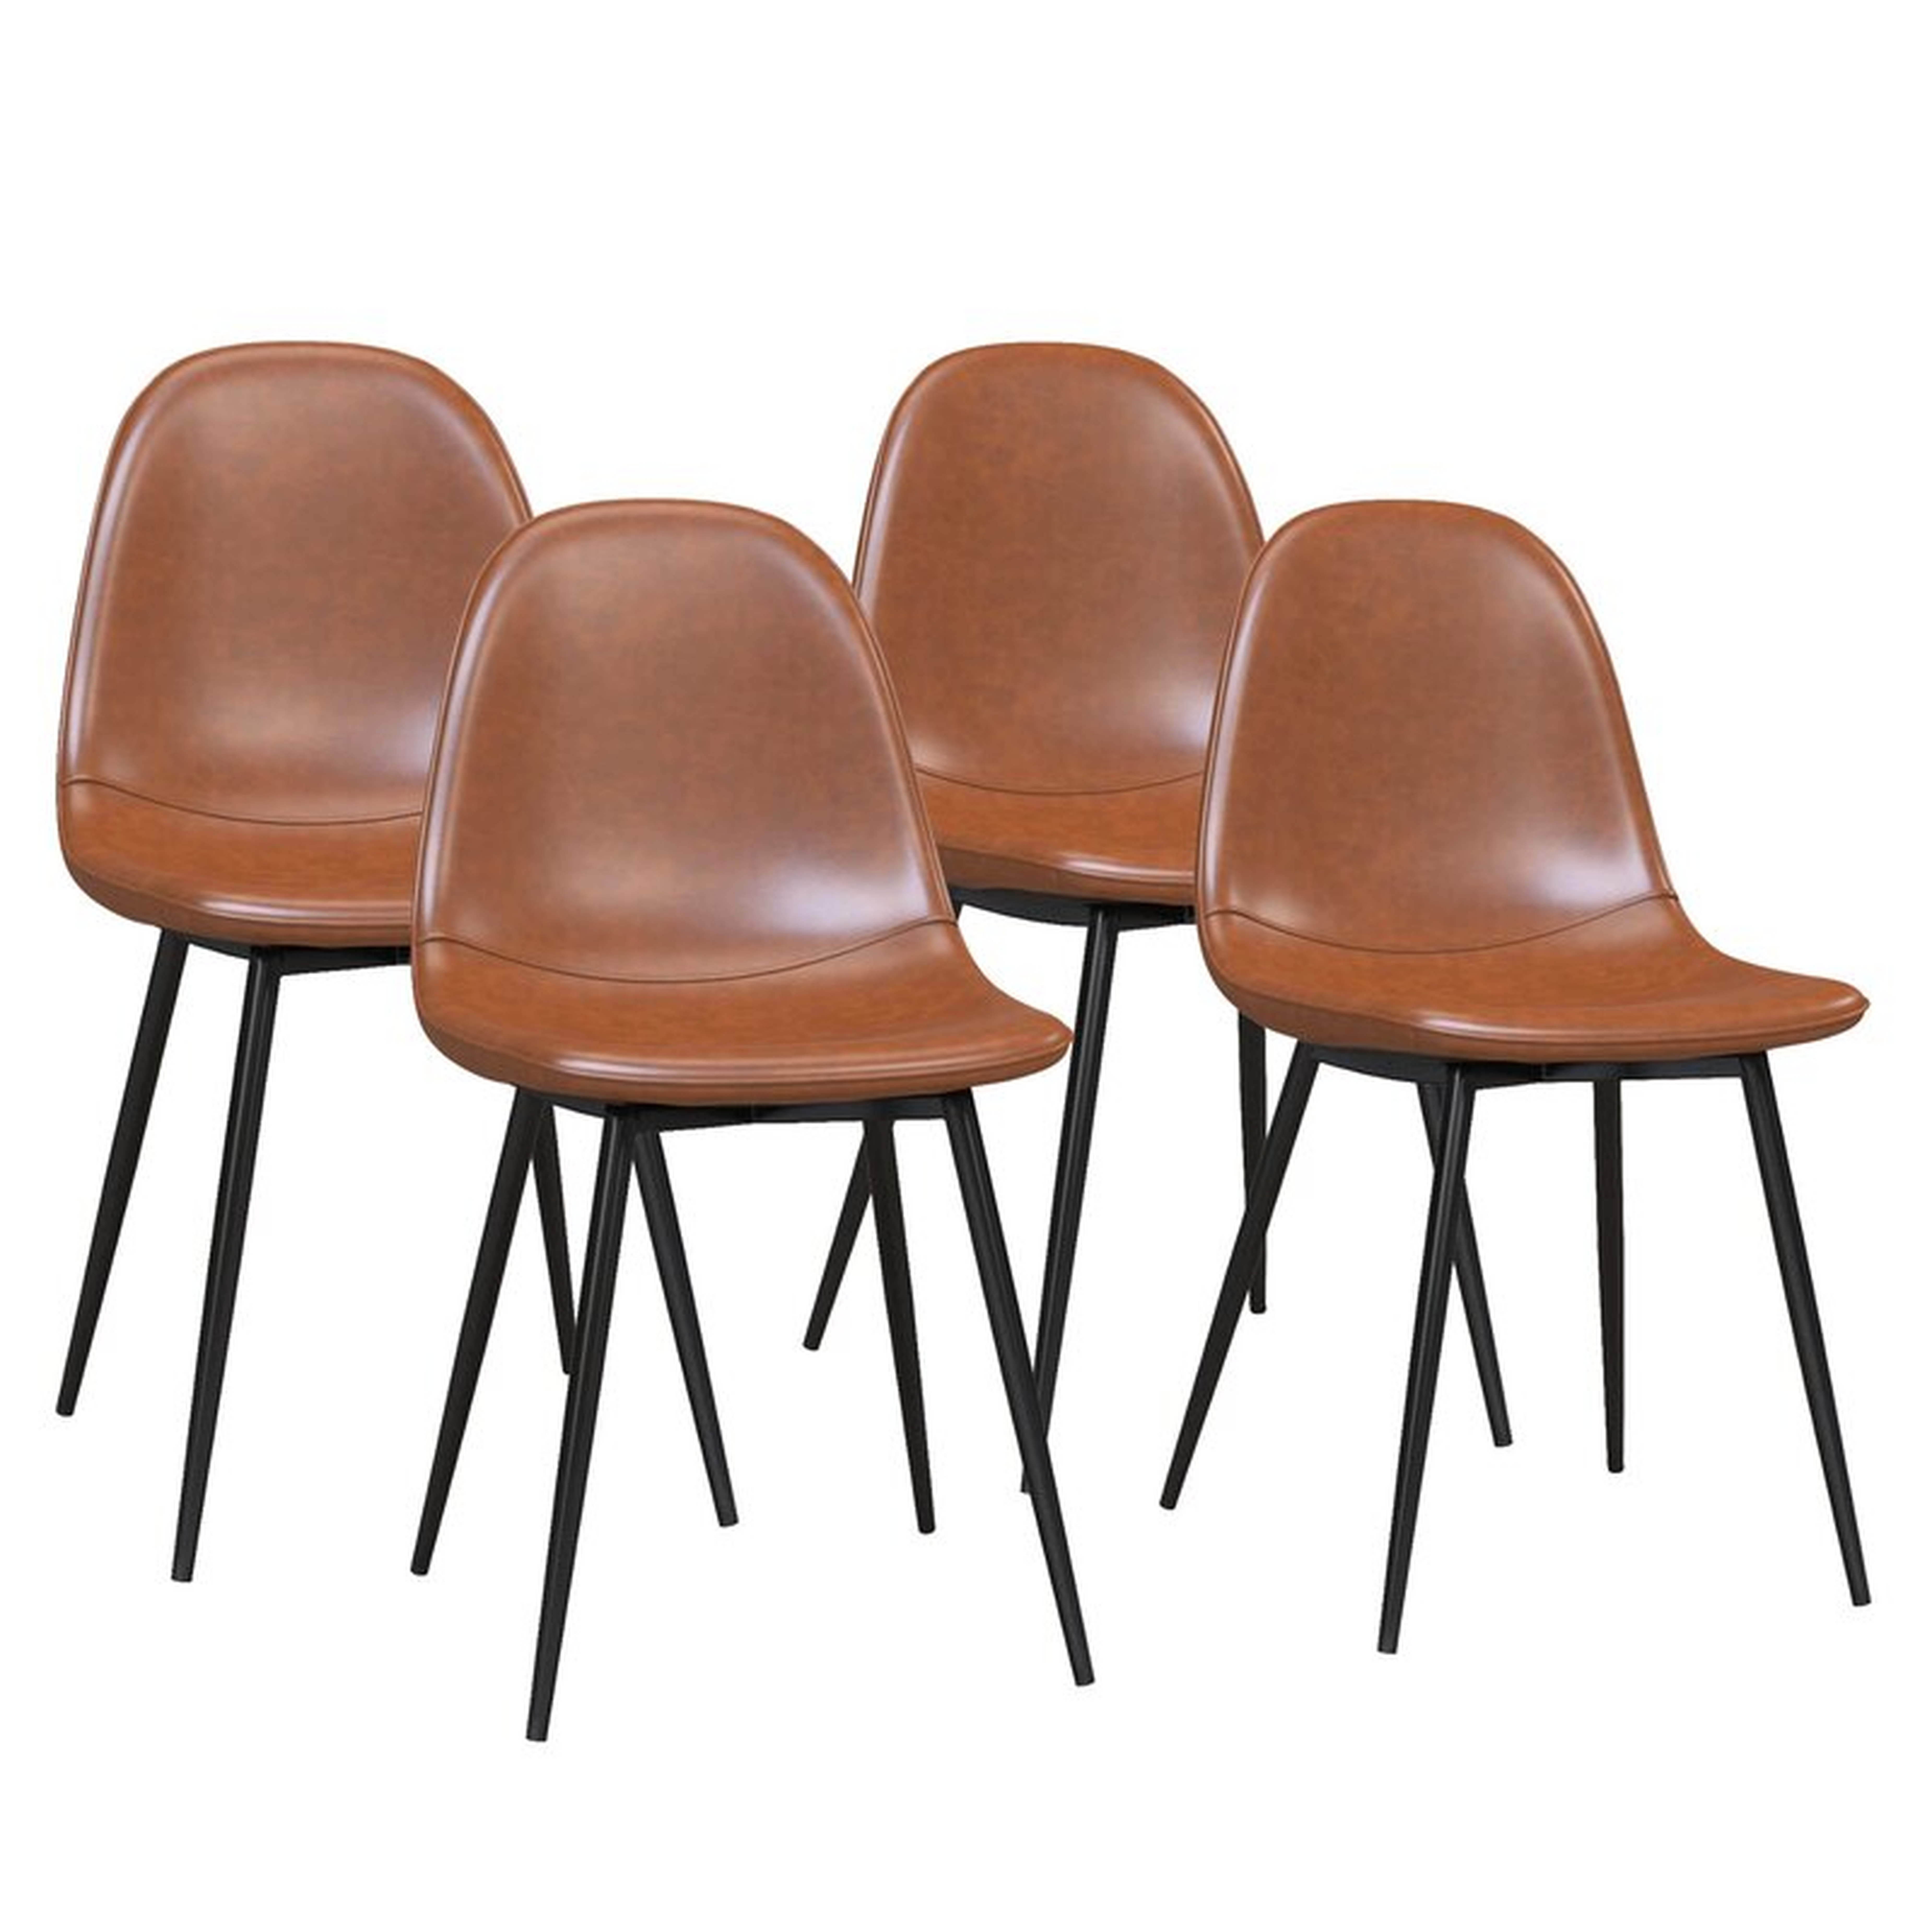 Wade Side Chair, Caramel Faux Leather, Set of 4 - Wayfair